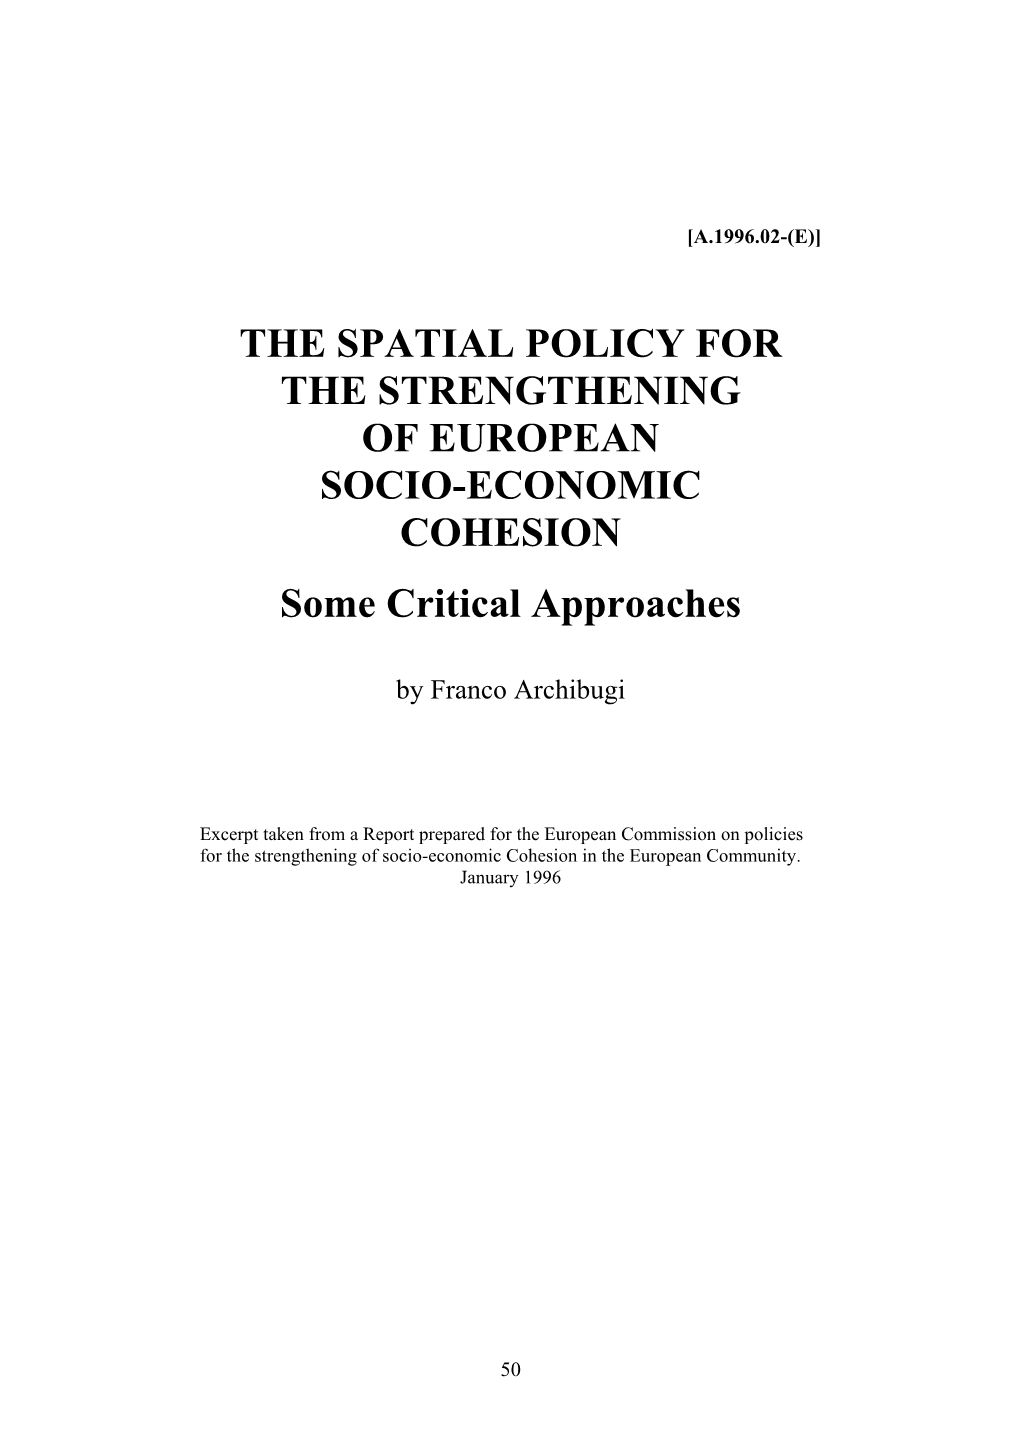 The Spatial Policy for the Strengthening of European Socio-Economic Cohesion